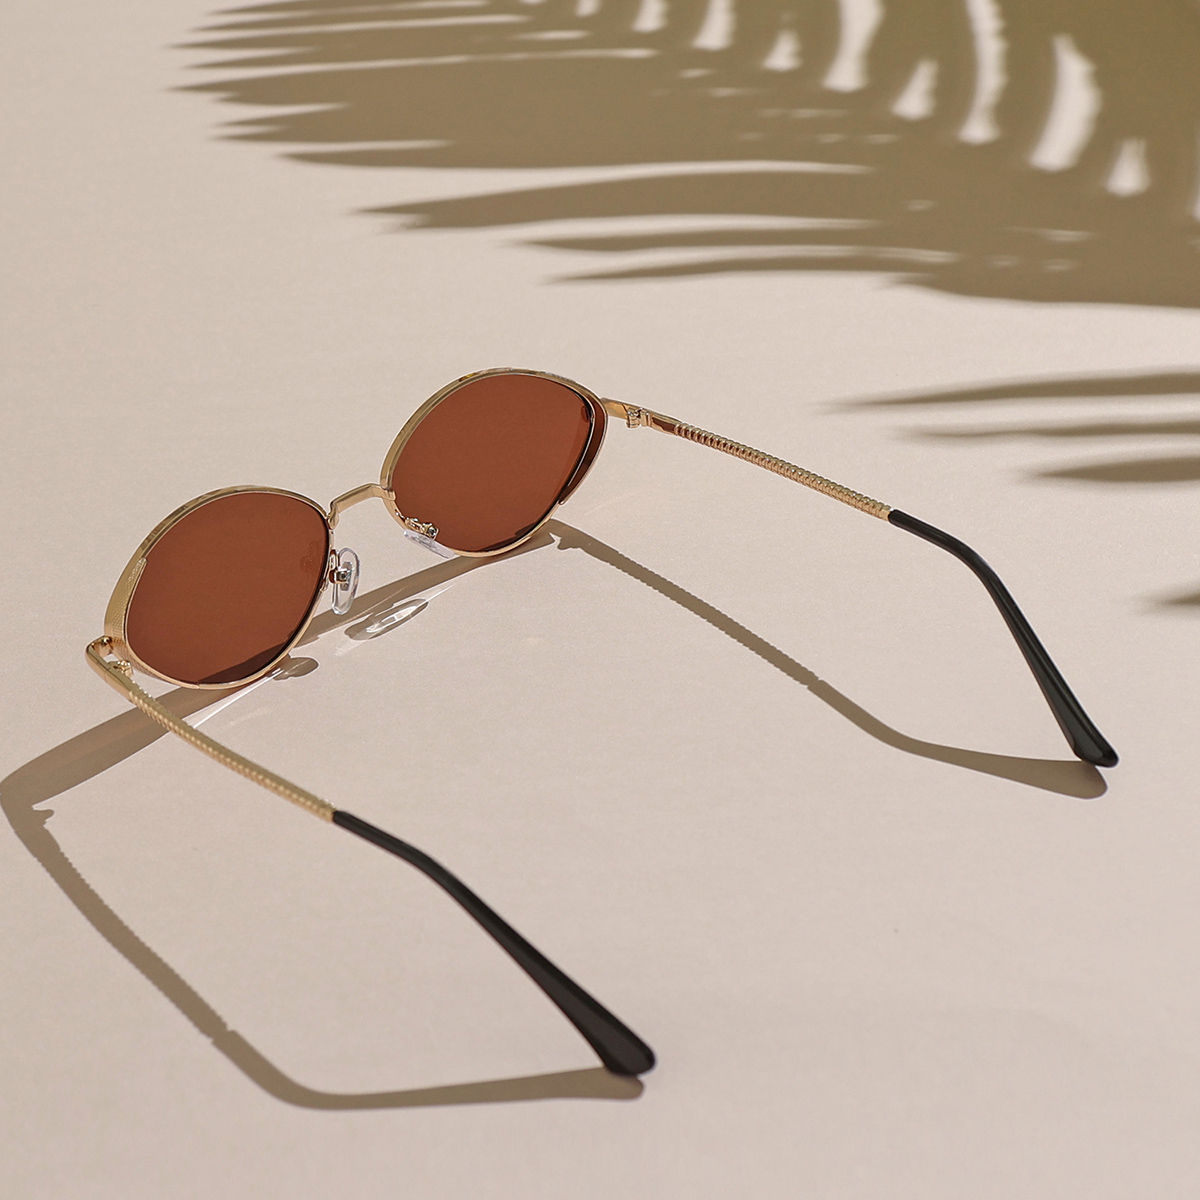 Reclaimed Vintage 90s oval sunglasses in brown | ASOS